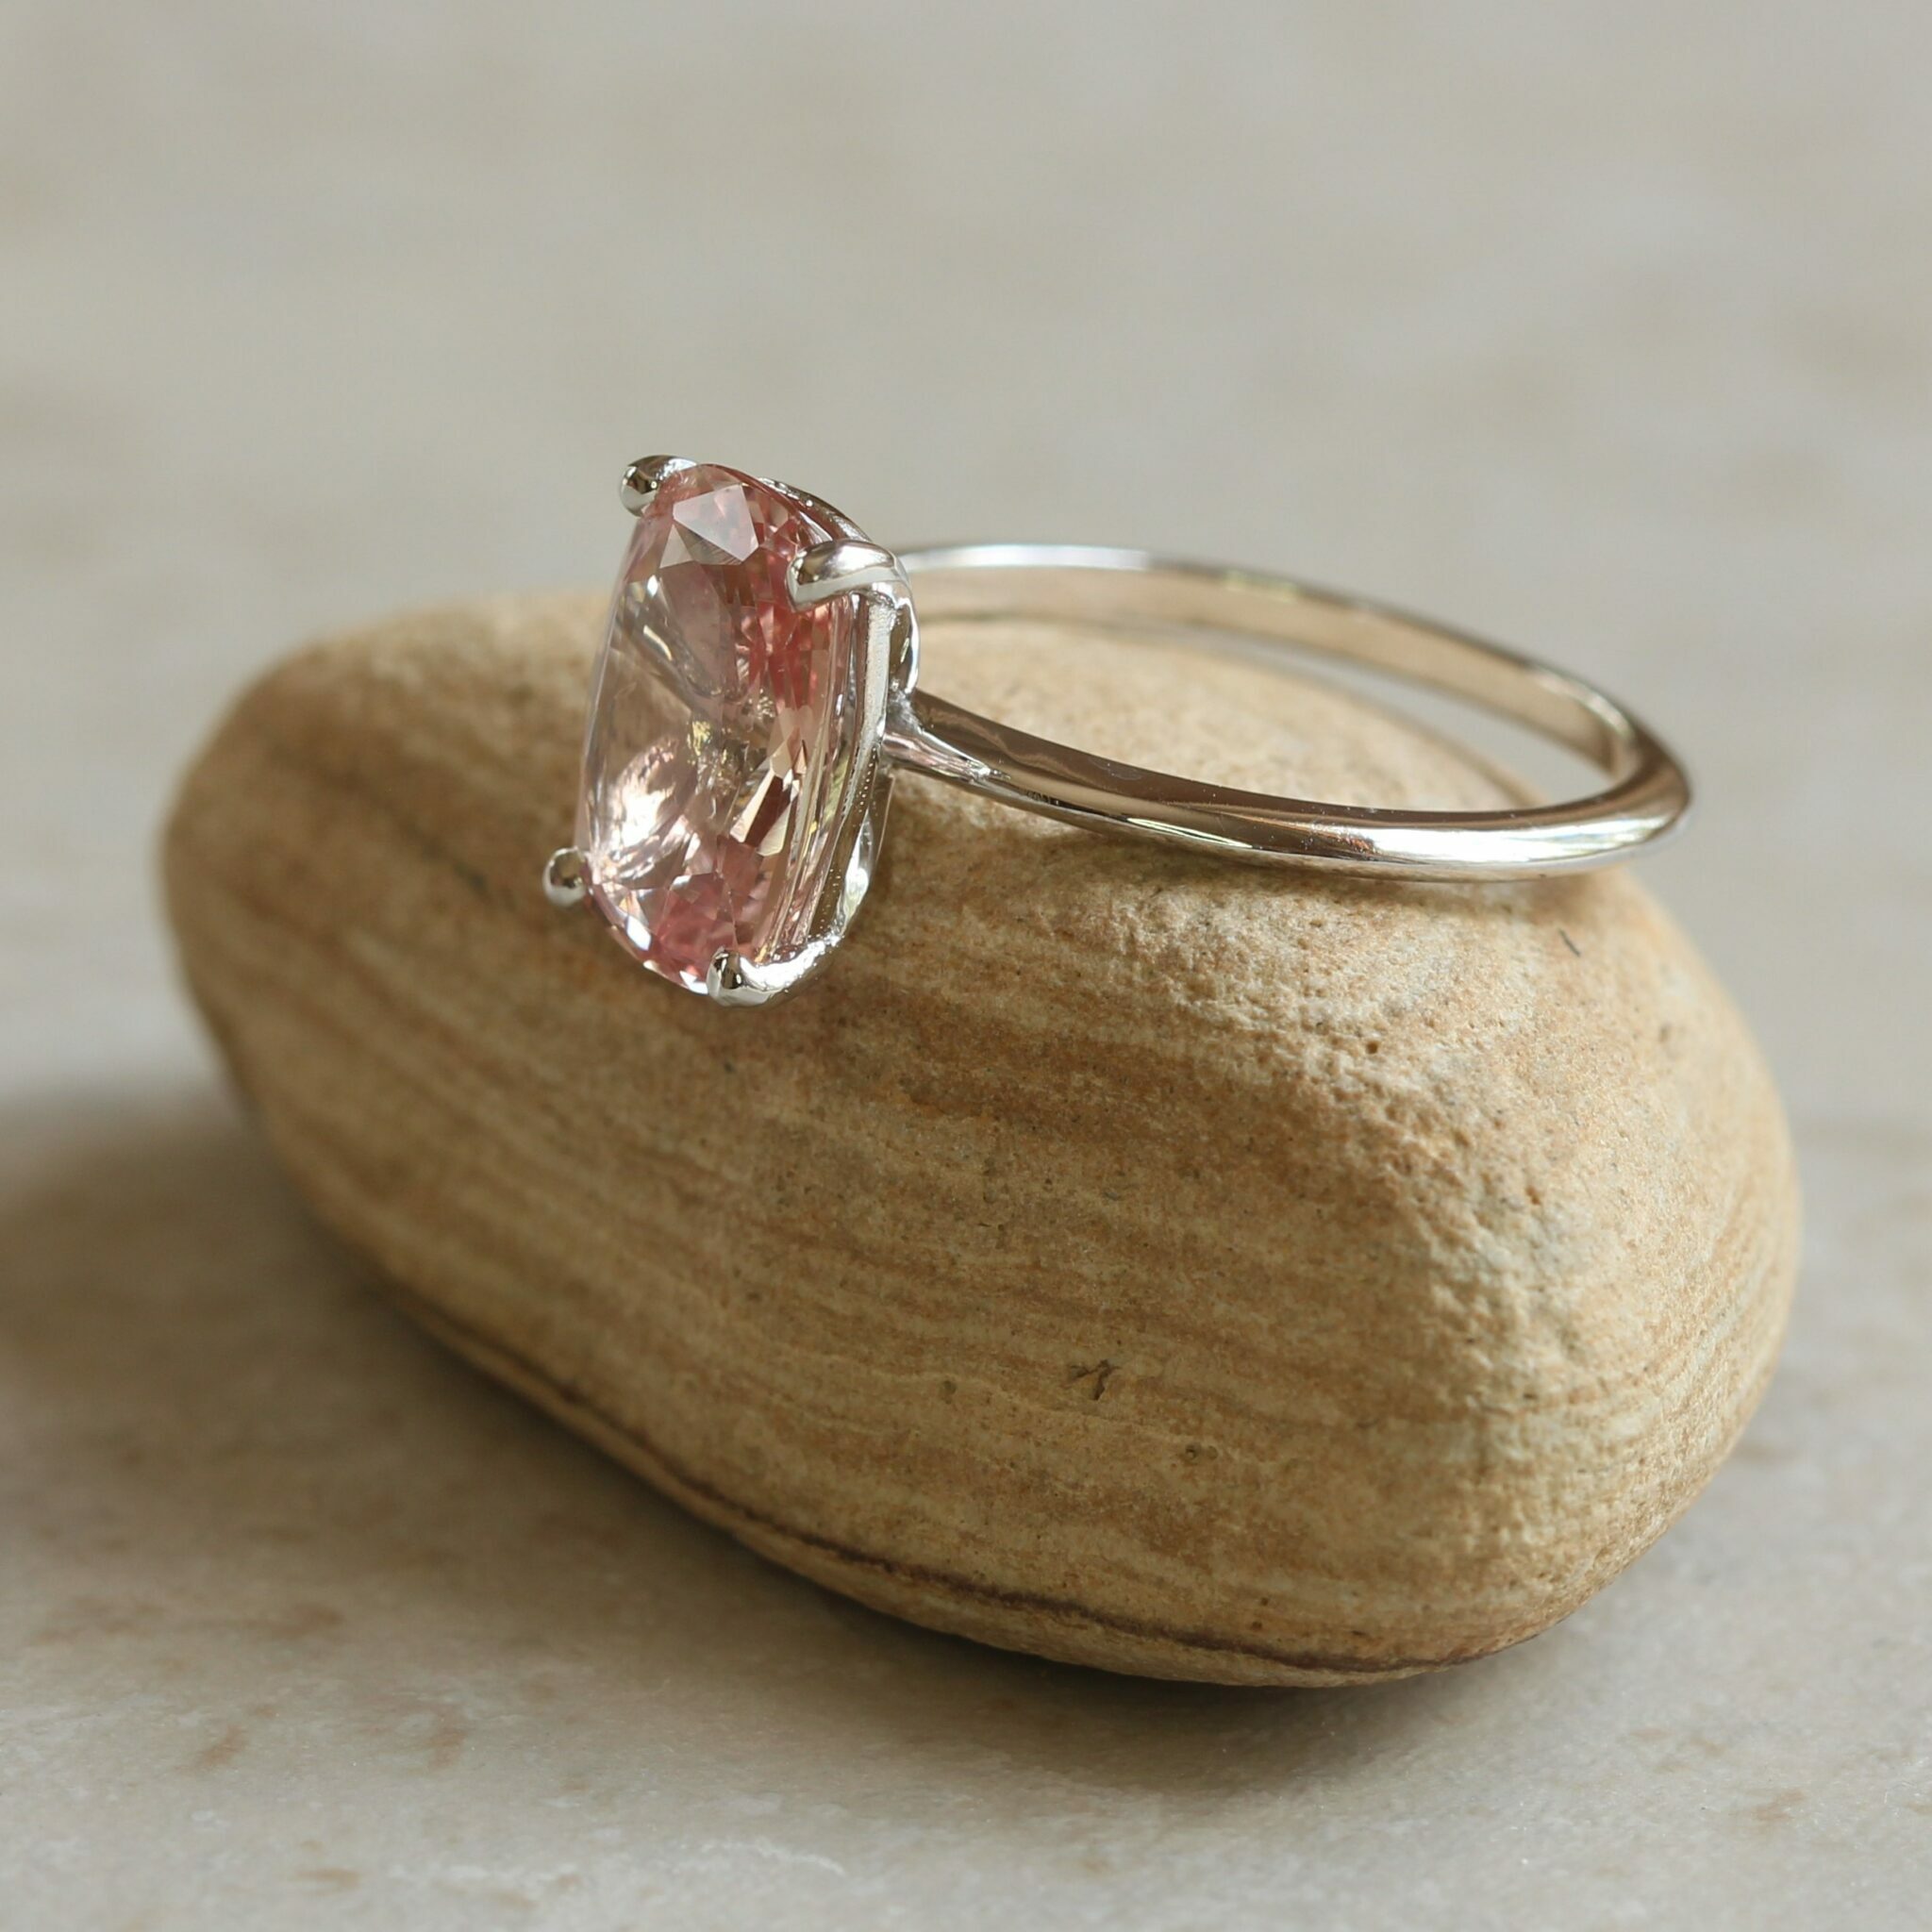 Padparadscha-sapphire-solitaire-engagement-ring-in-14k-white-gold-by-Laurie-Sarah-LS6069-2